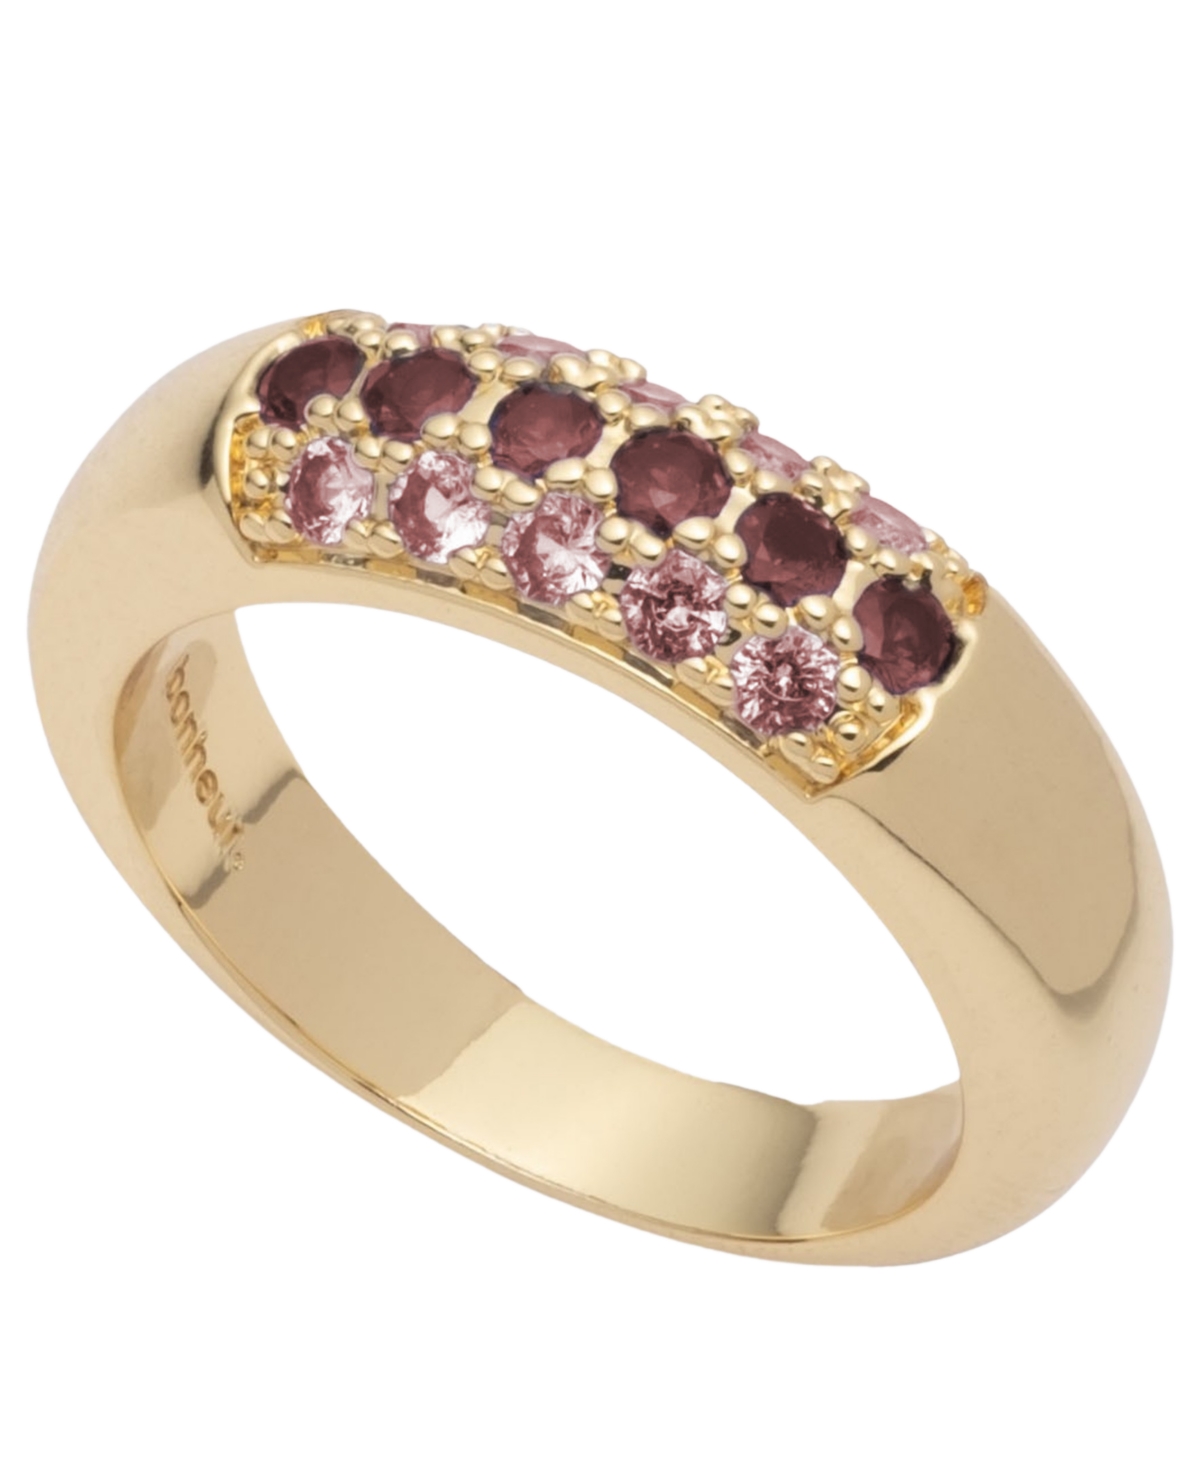 Bonheur Jewelry Addison Pink Red Crystal Band Ring In Karat Micro Plated Gold Over Brass